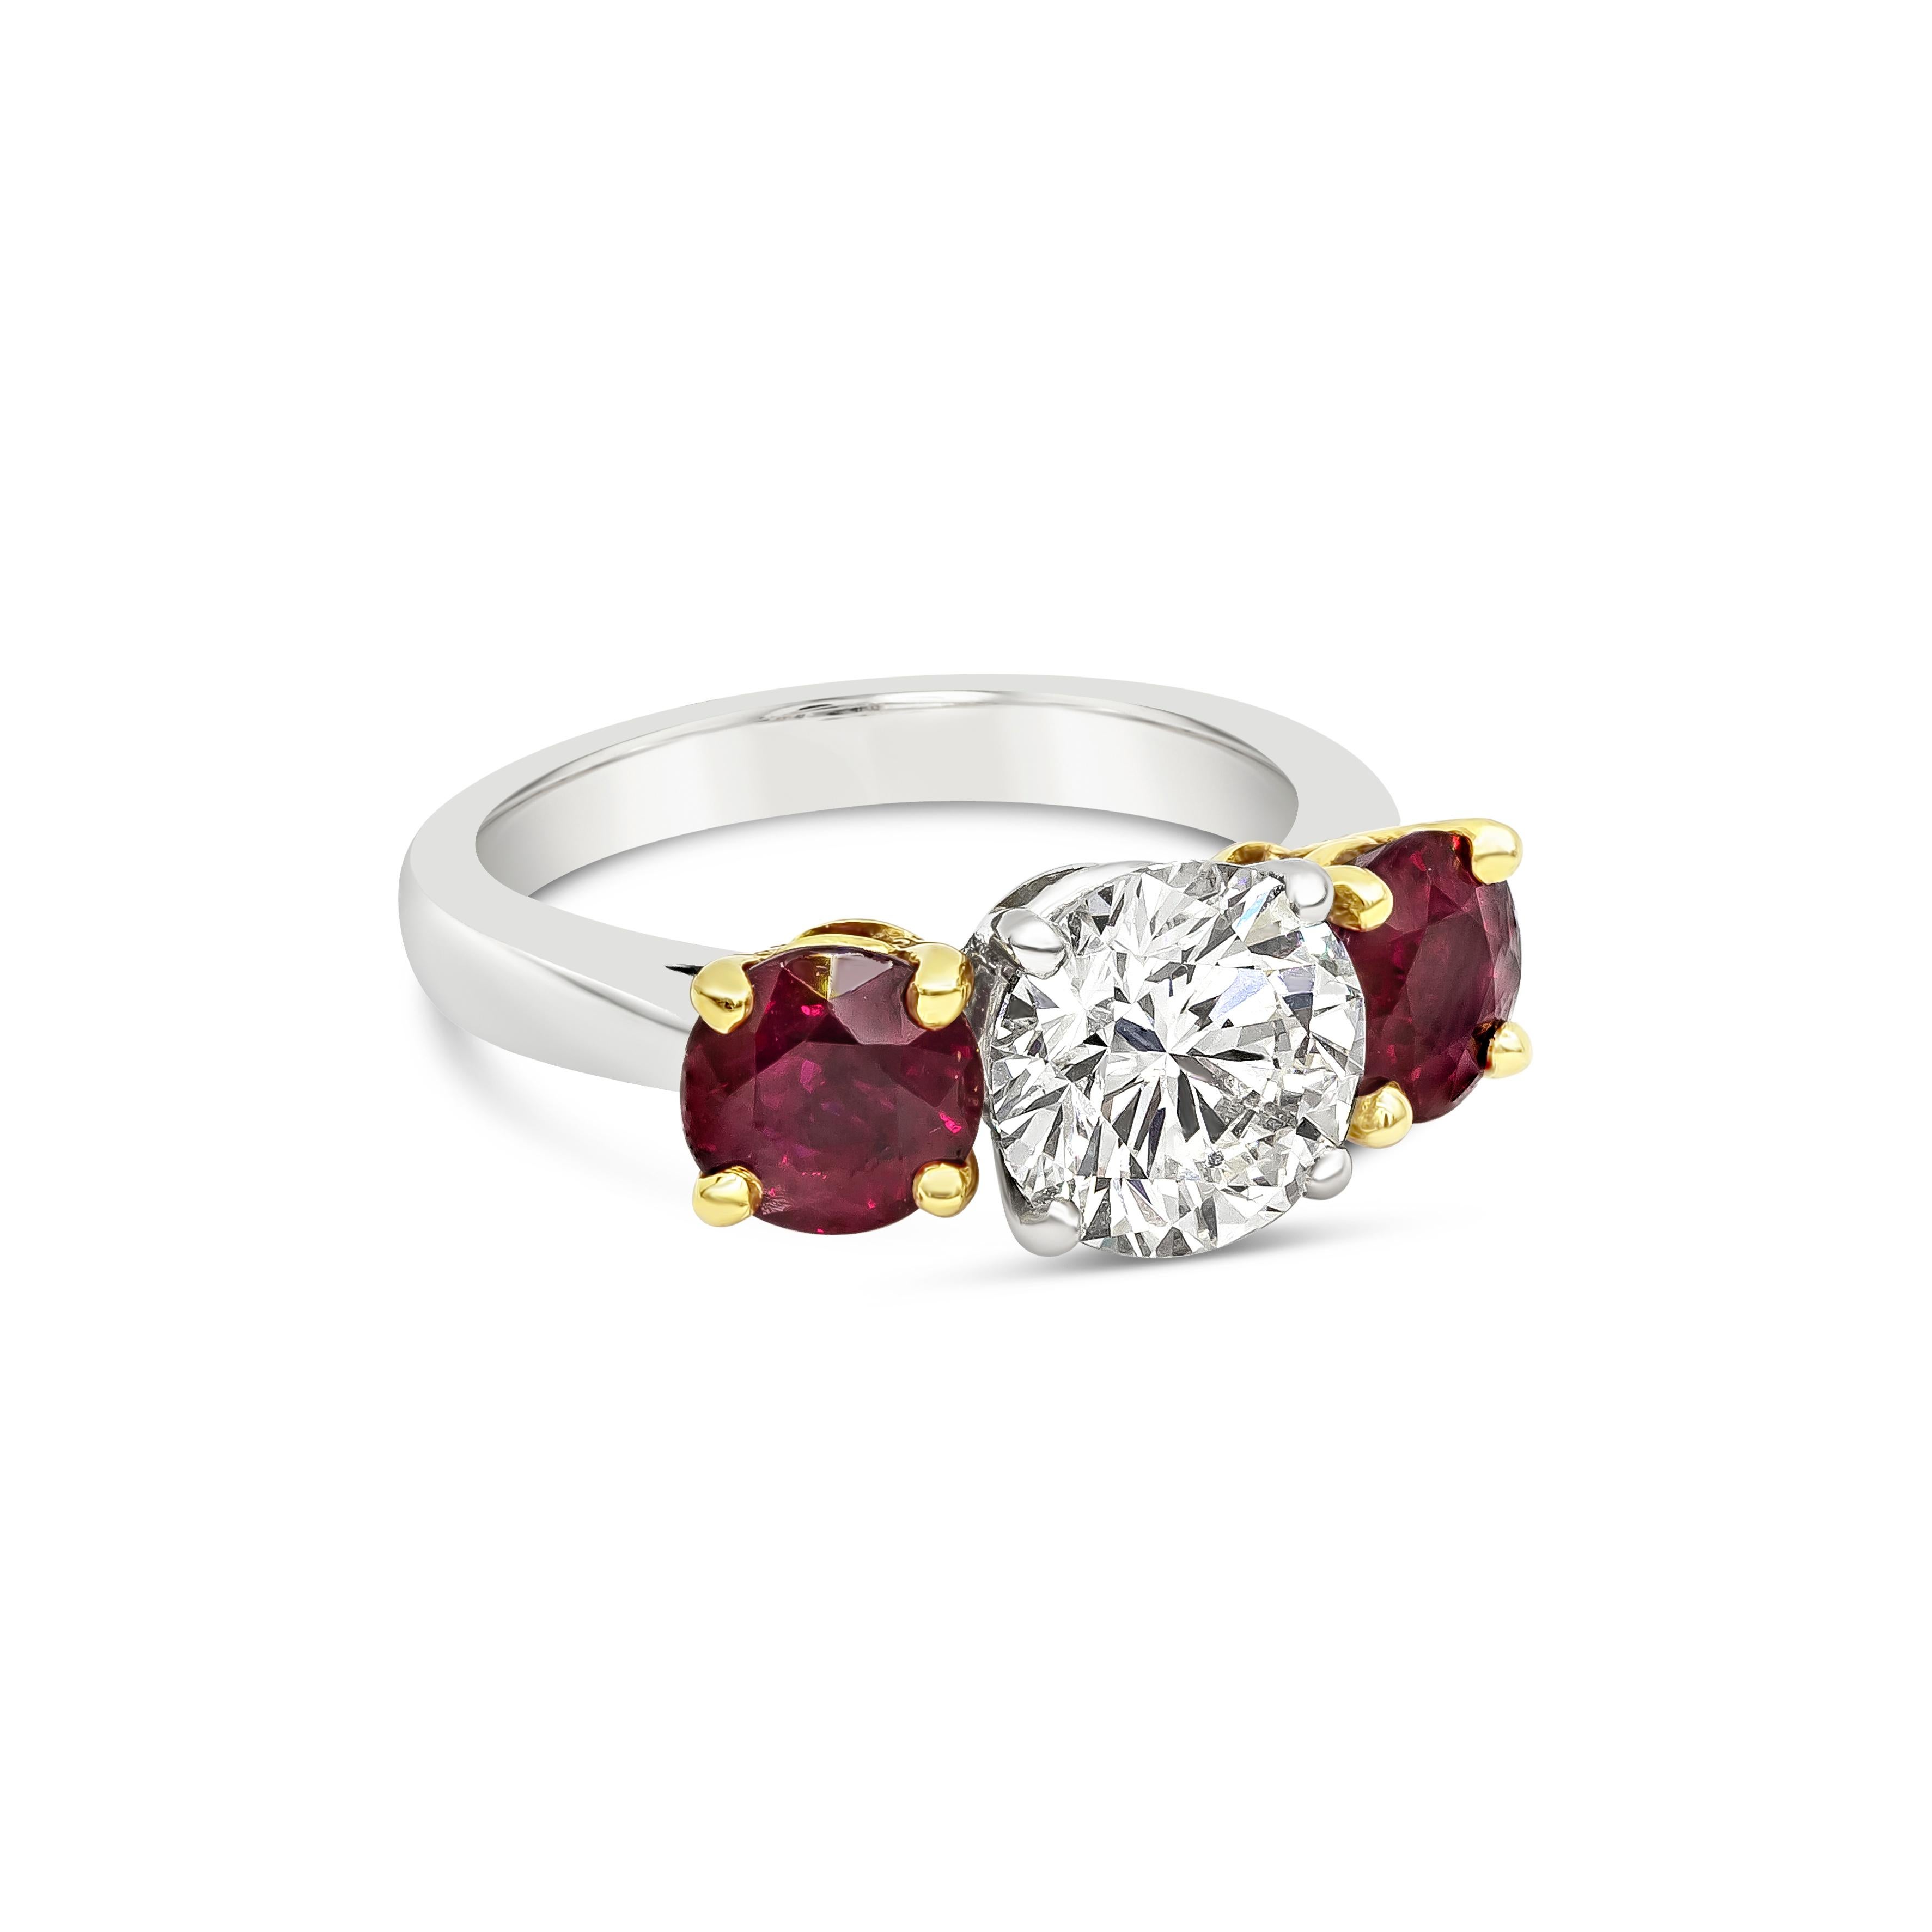 A well crafted three-stone engagement ring featuring a 2.04 carats brilliant round diamond certified by GIA as J color, VS2 in clarity. Flanking the center diamond are color-rich round rubies on each side weighing 2.14 carats total and set in a